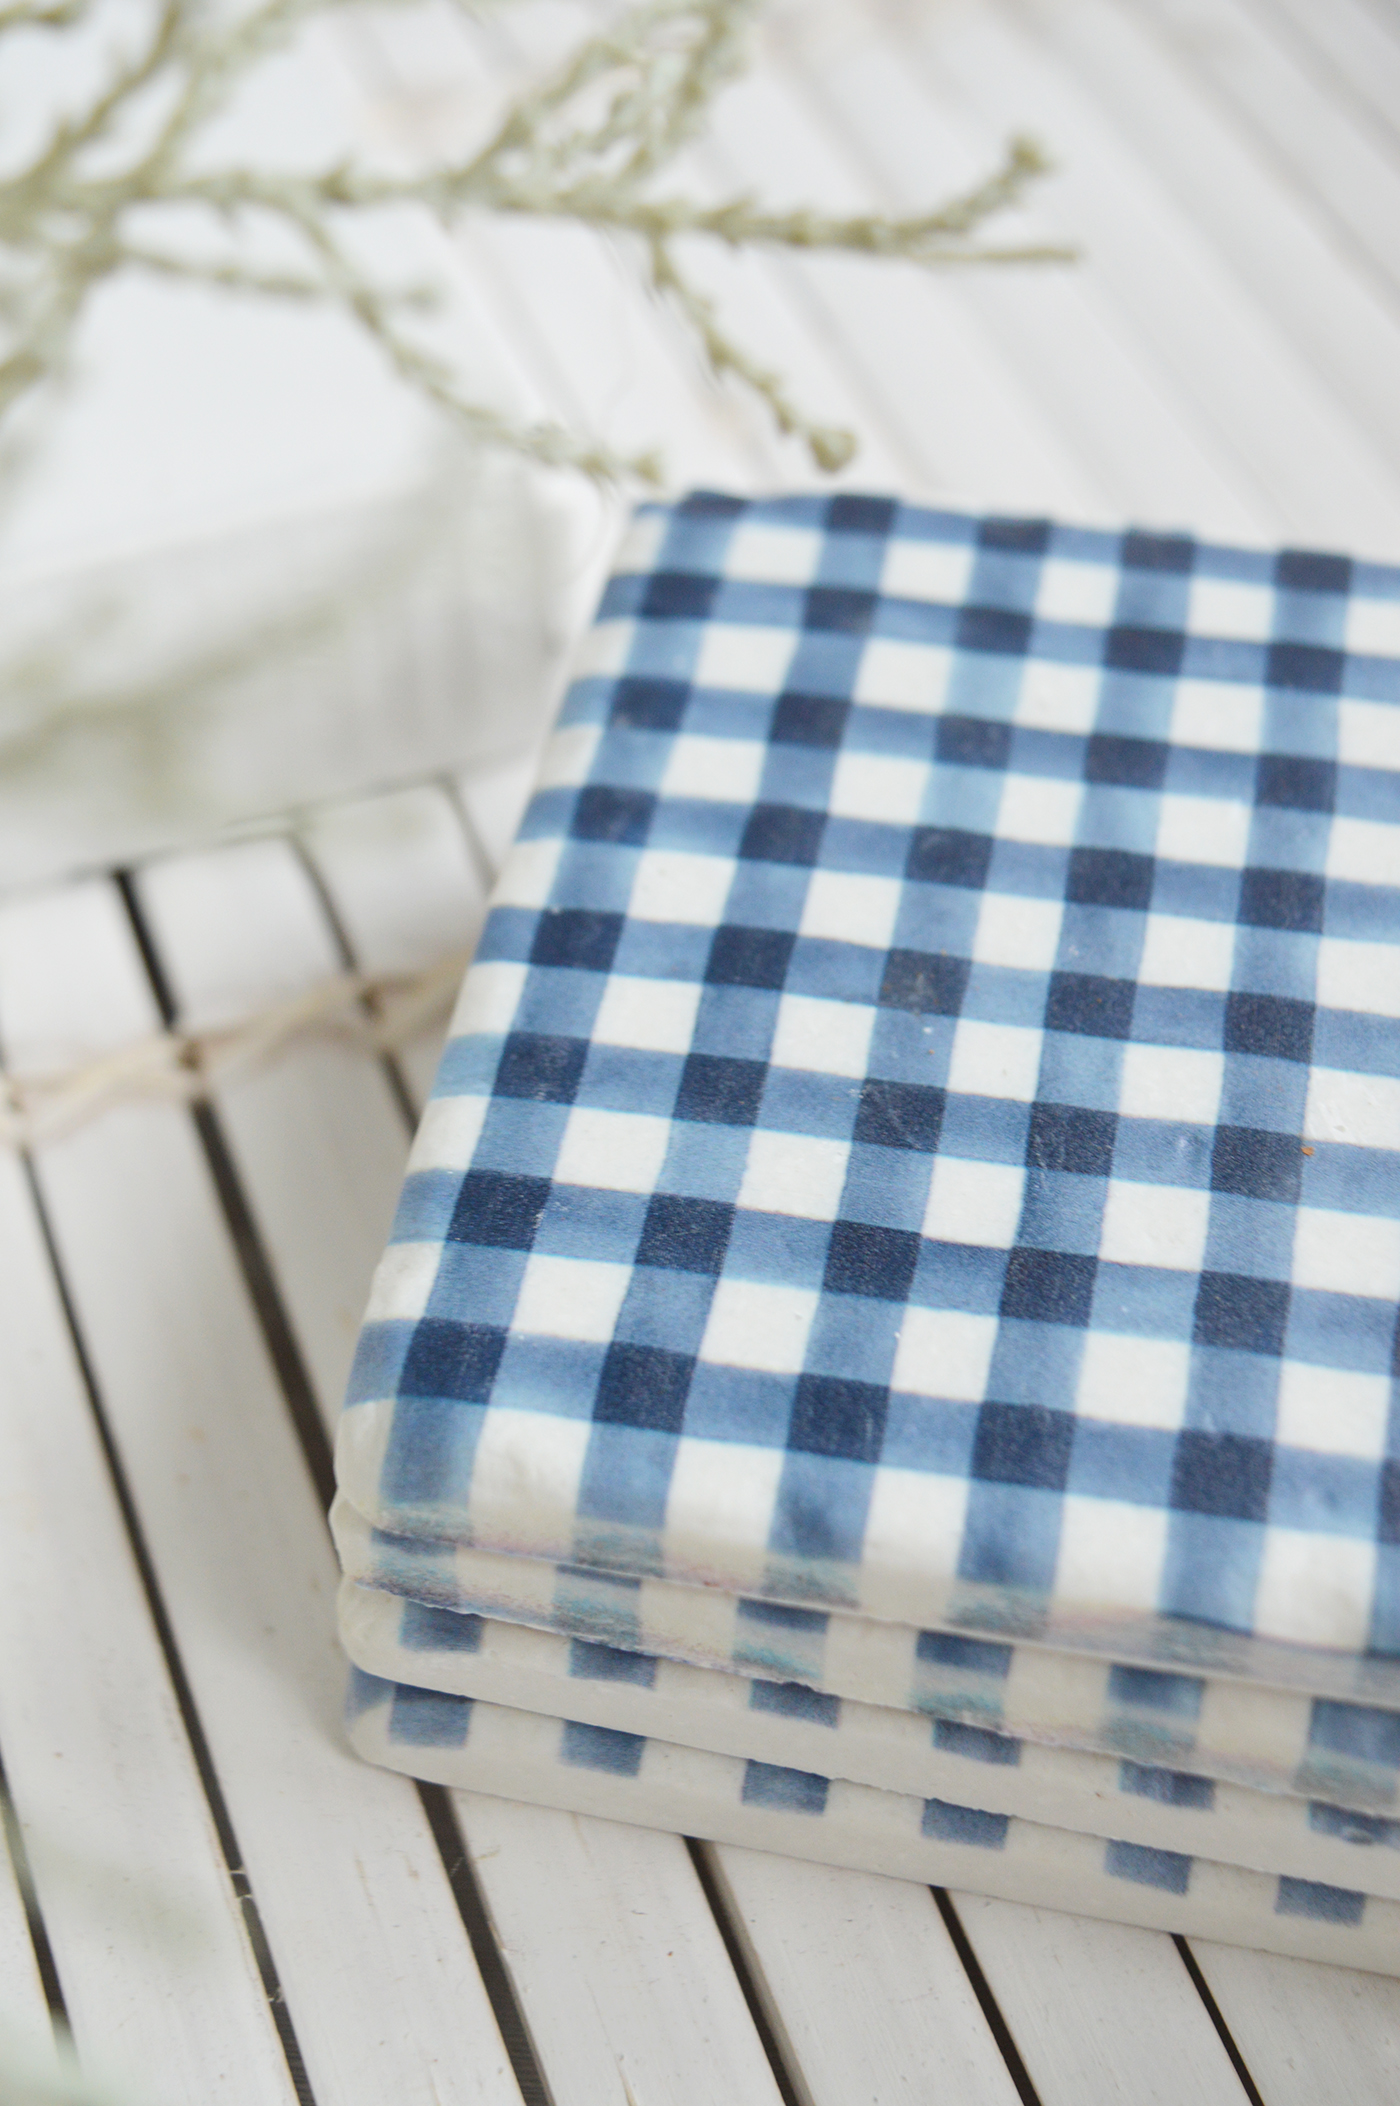 Gingham coasters - New England modern farmhouse, country and coastal furniture, home decor and interiors